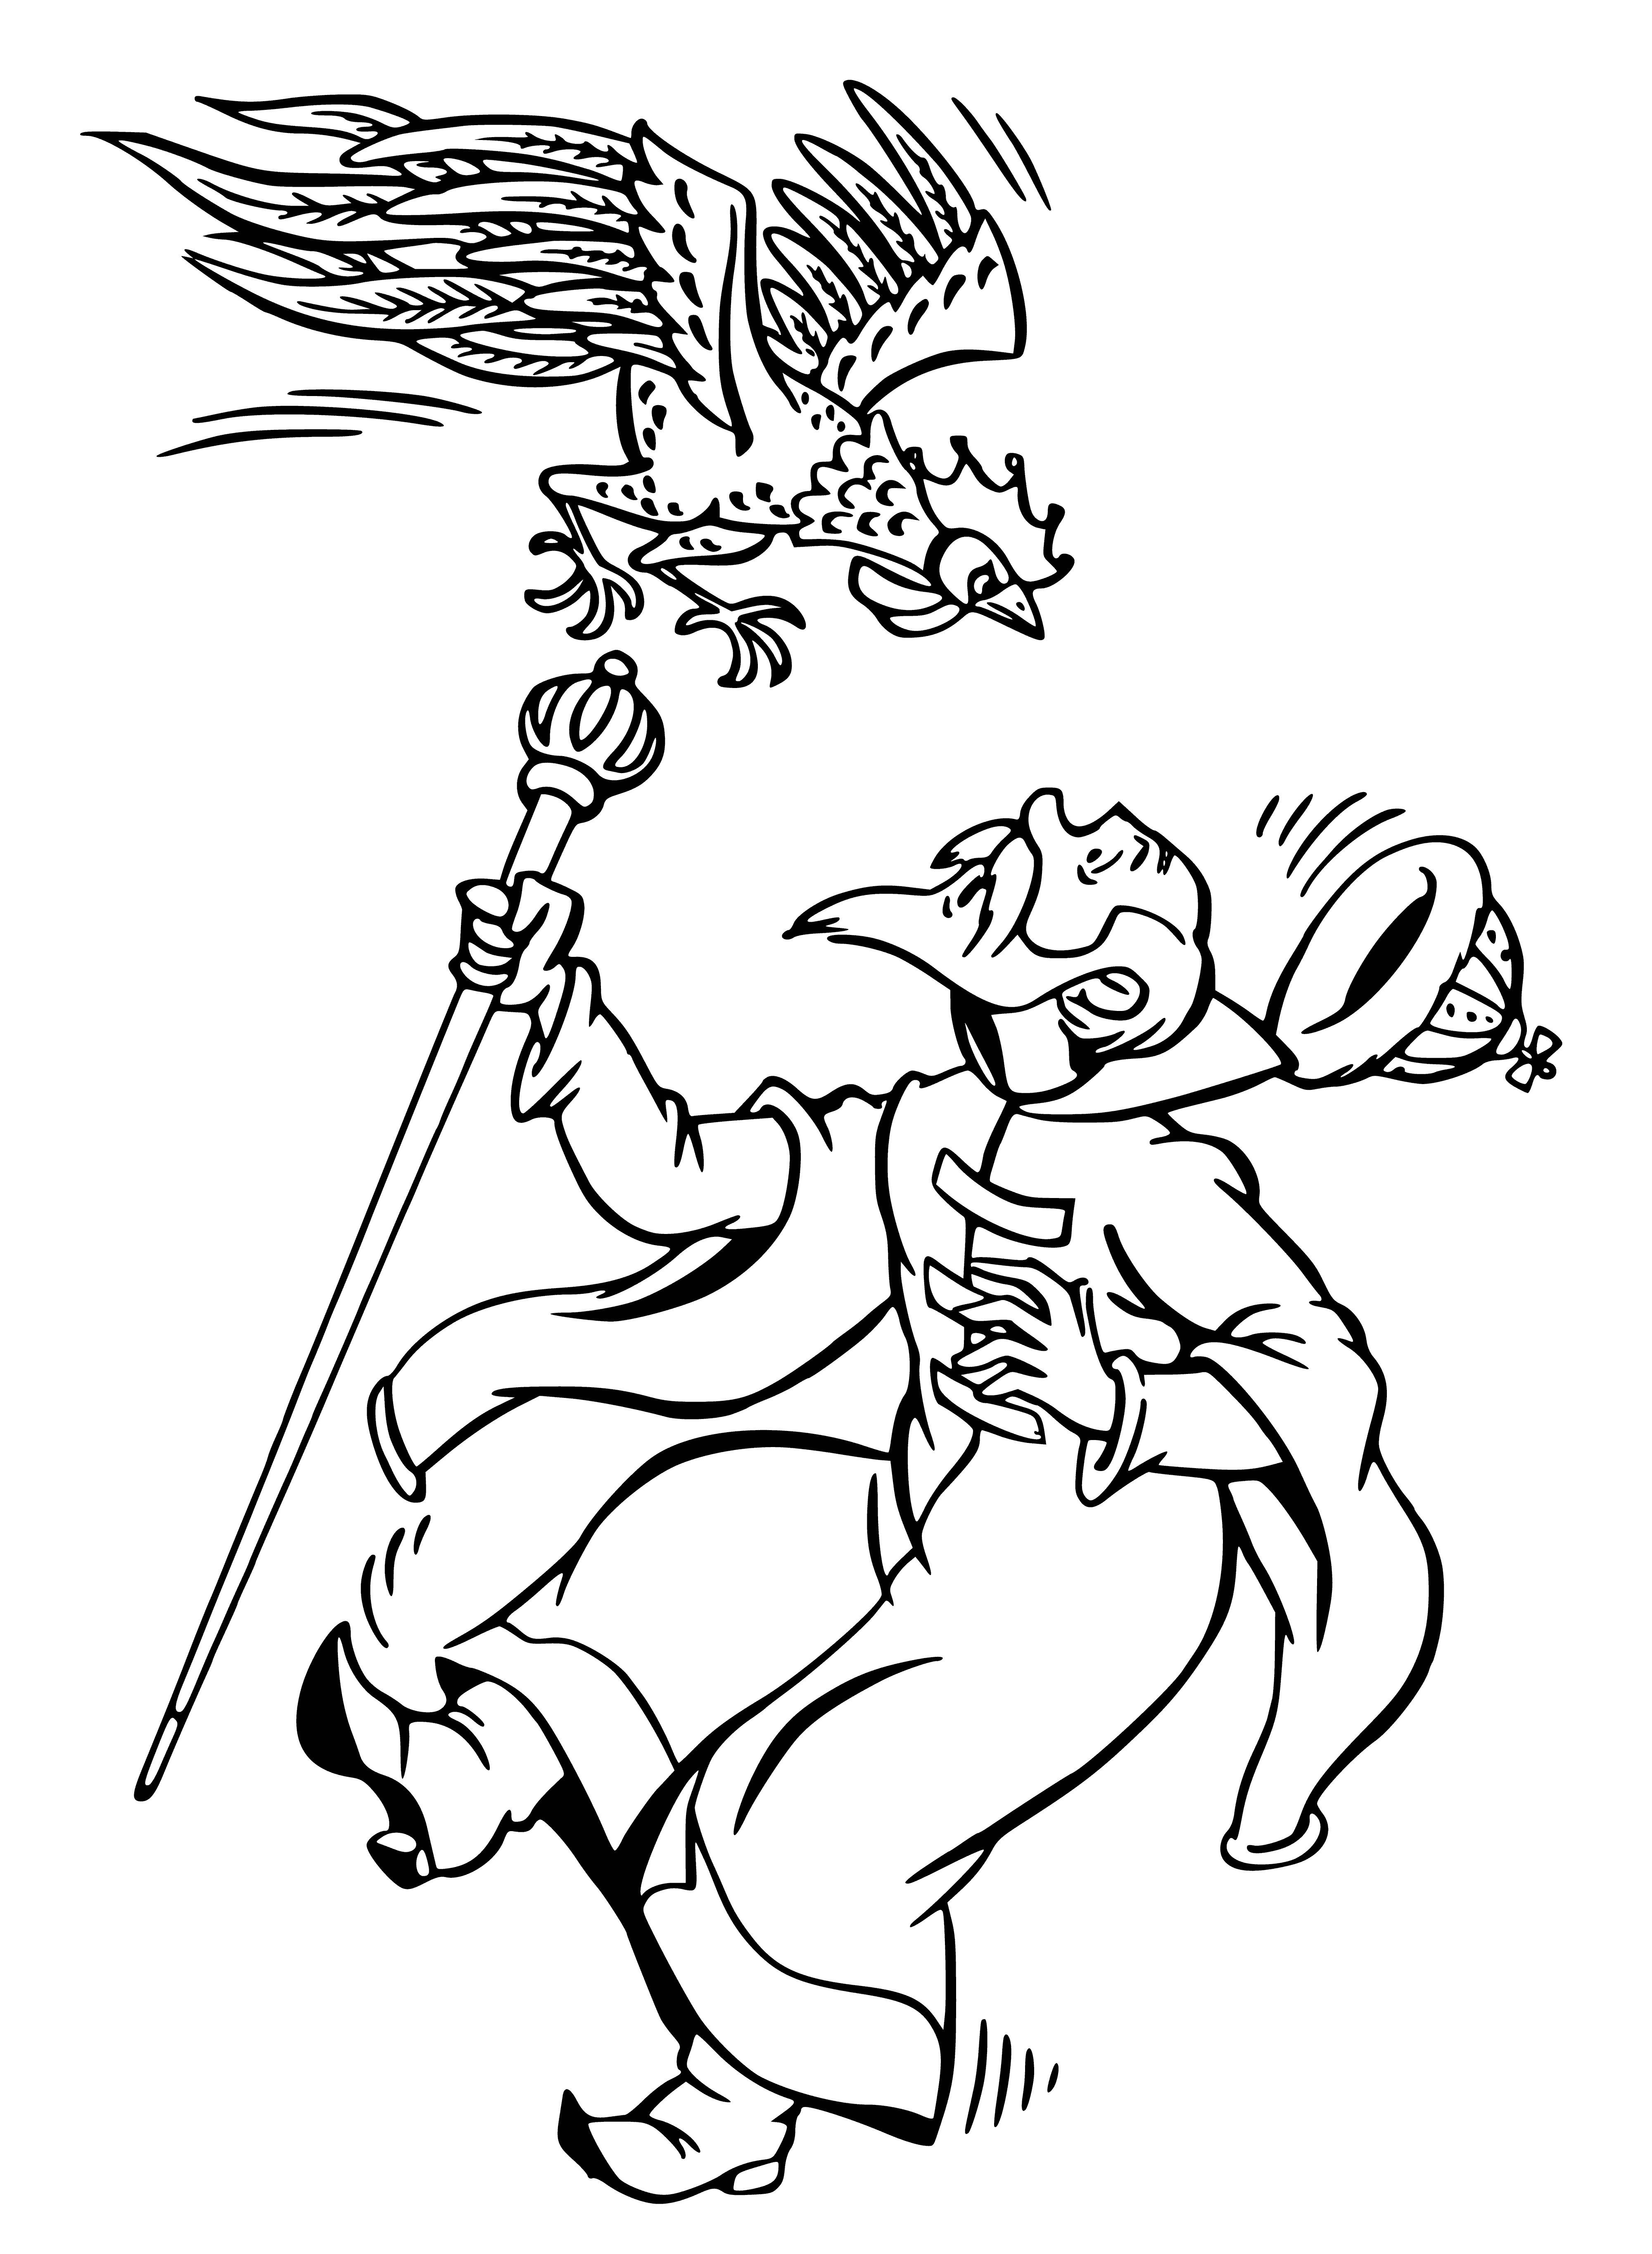 coloring page: Cock pecking at crown of sleeping/dead king, crowing over him.